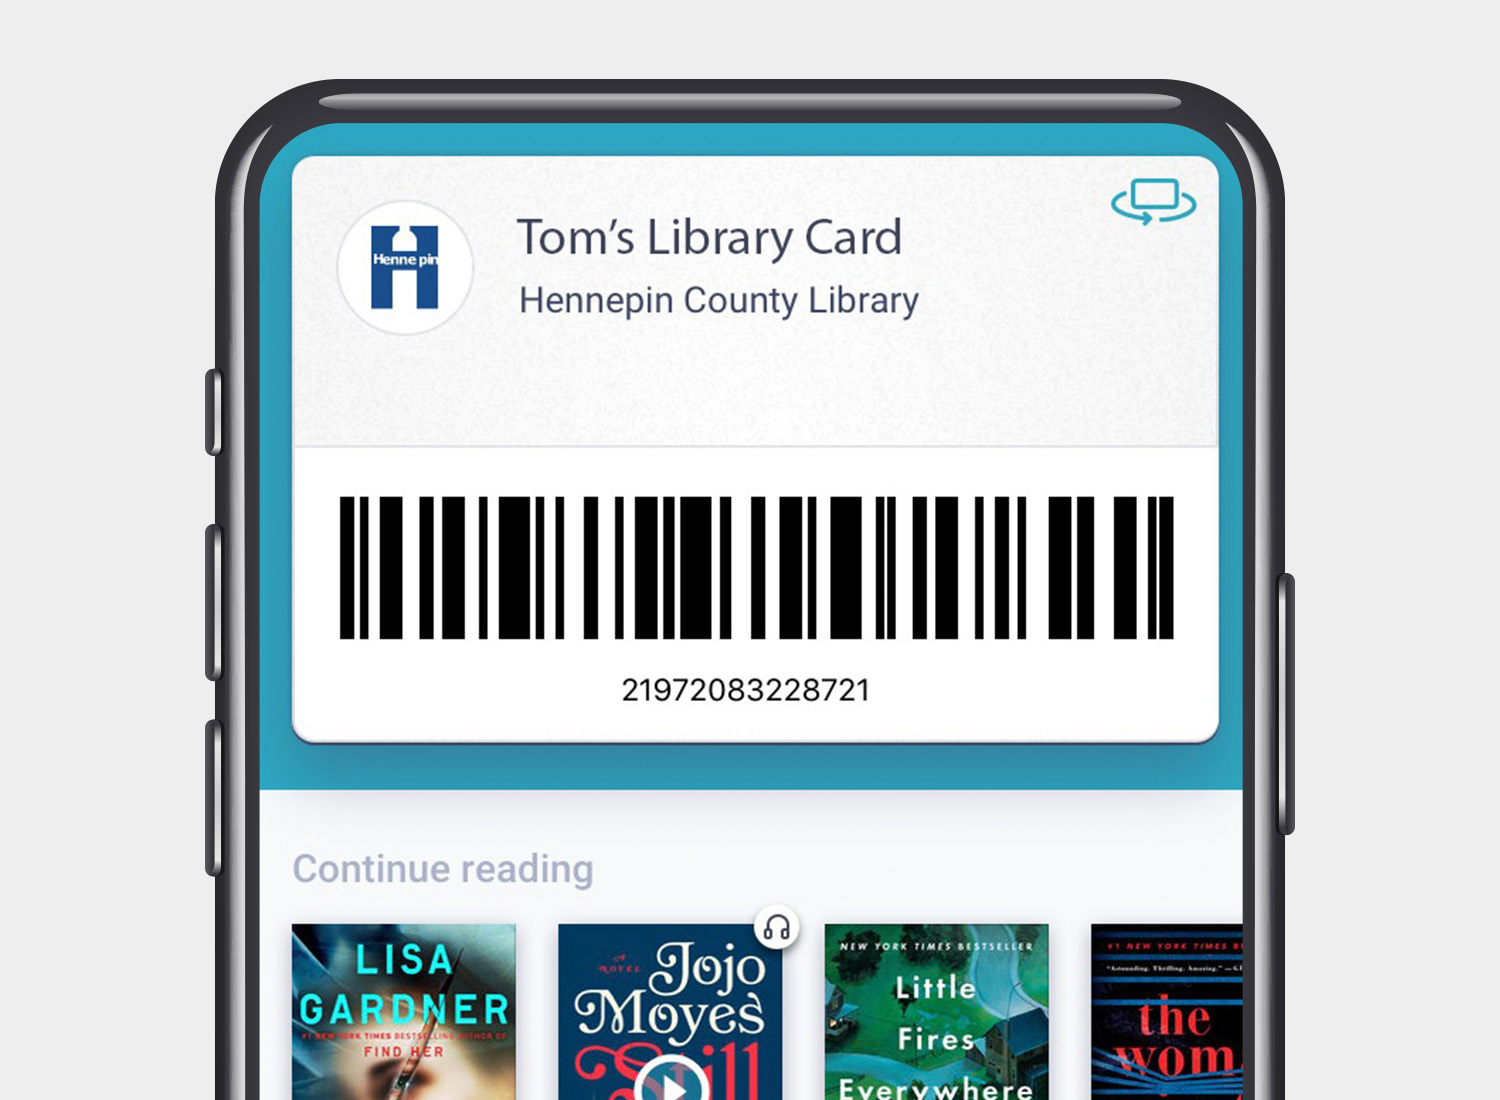 Virtual library card in smartphone app